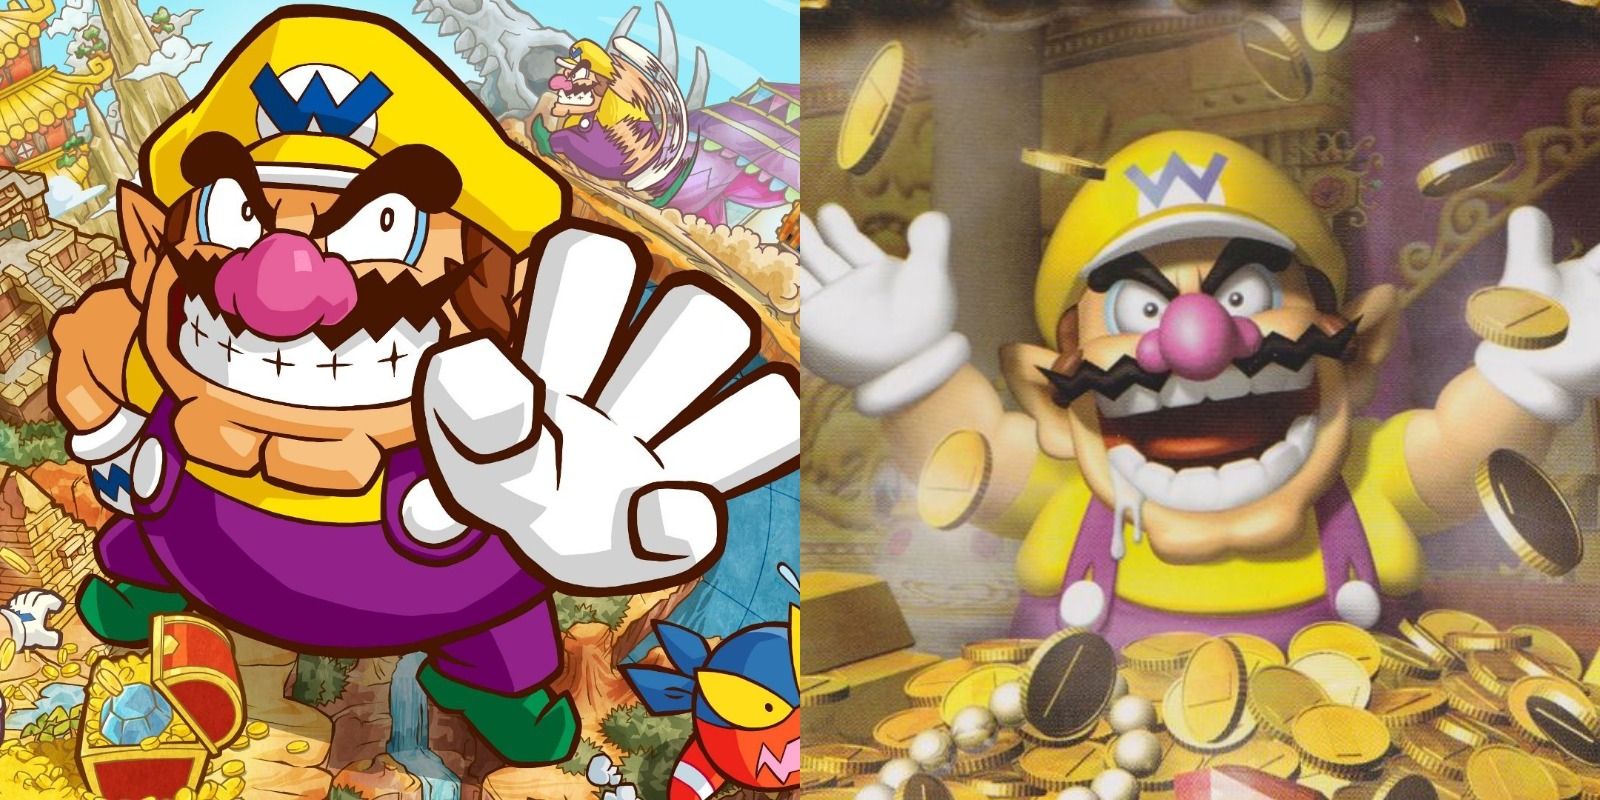 Split image of cover art for Wario Land: Shake It! and Wario World